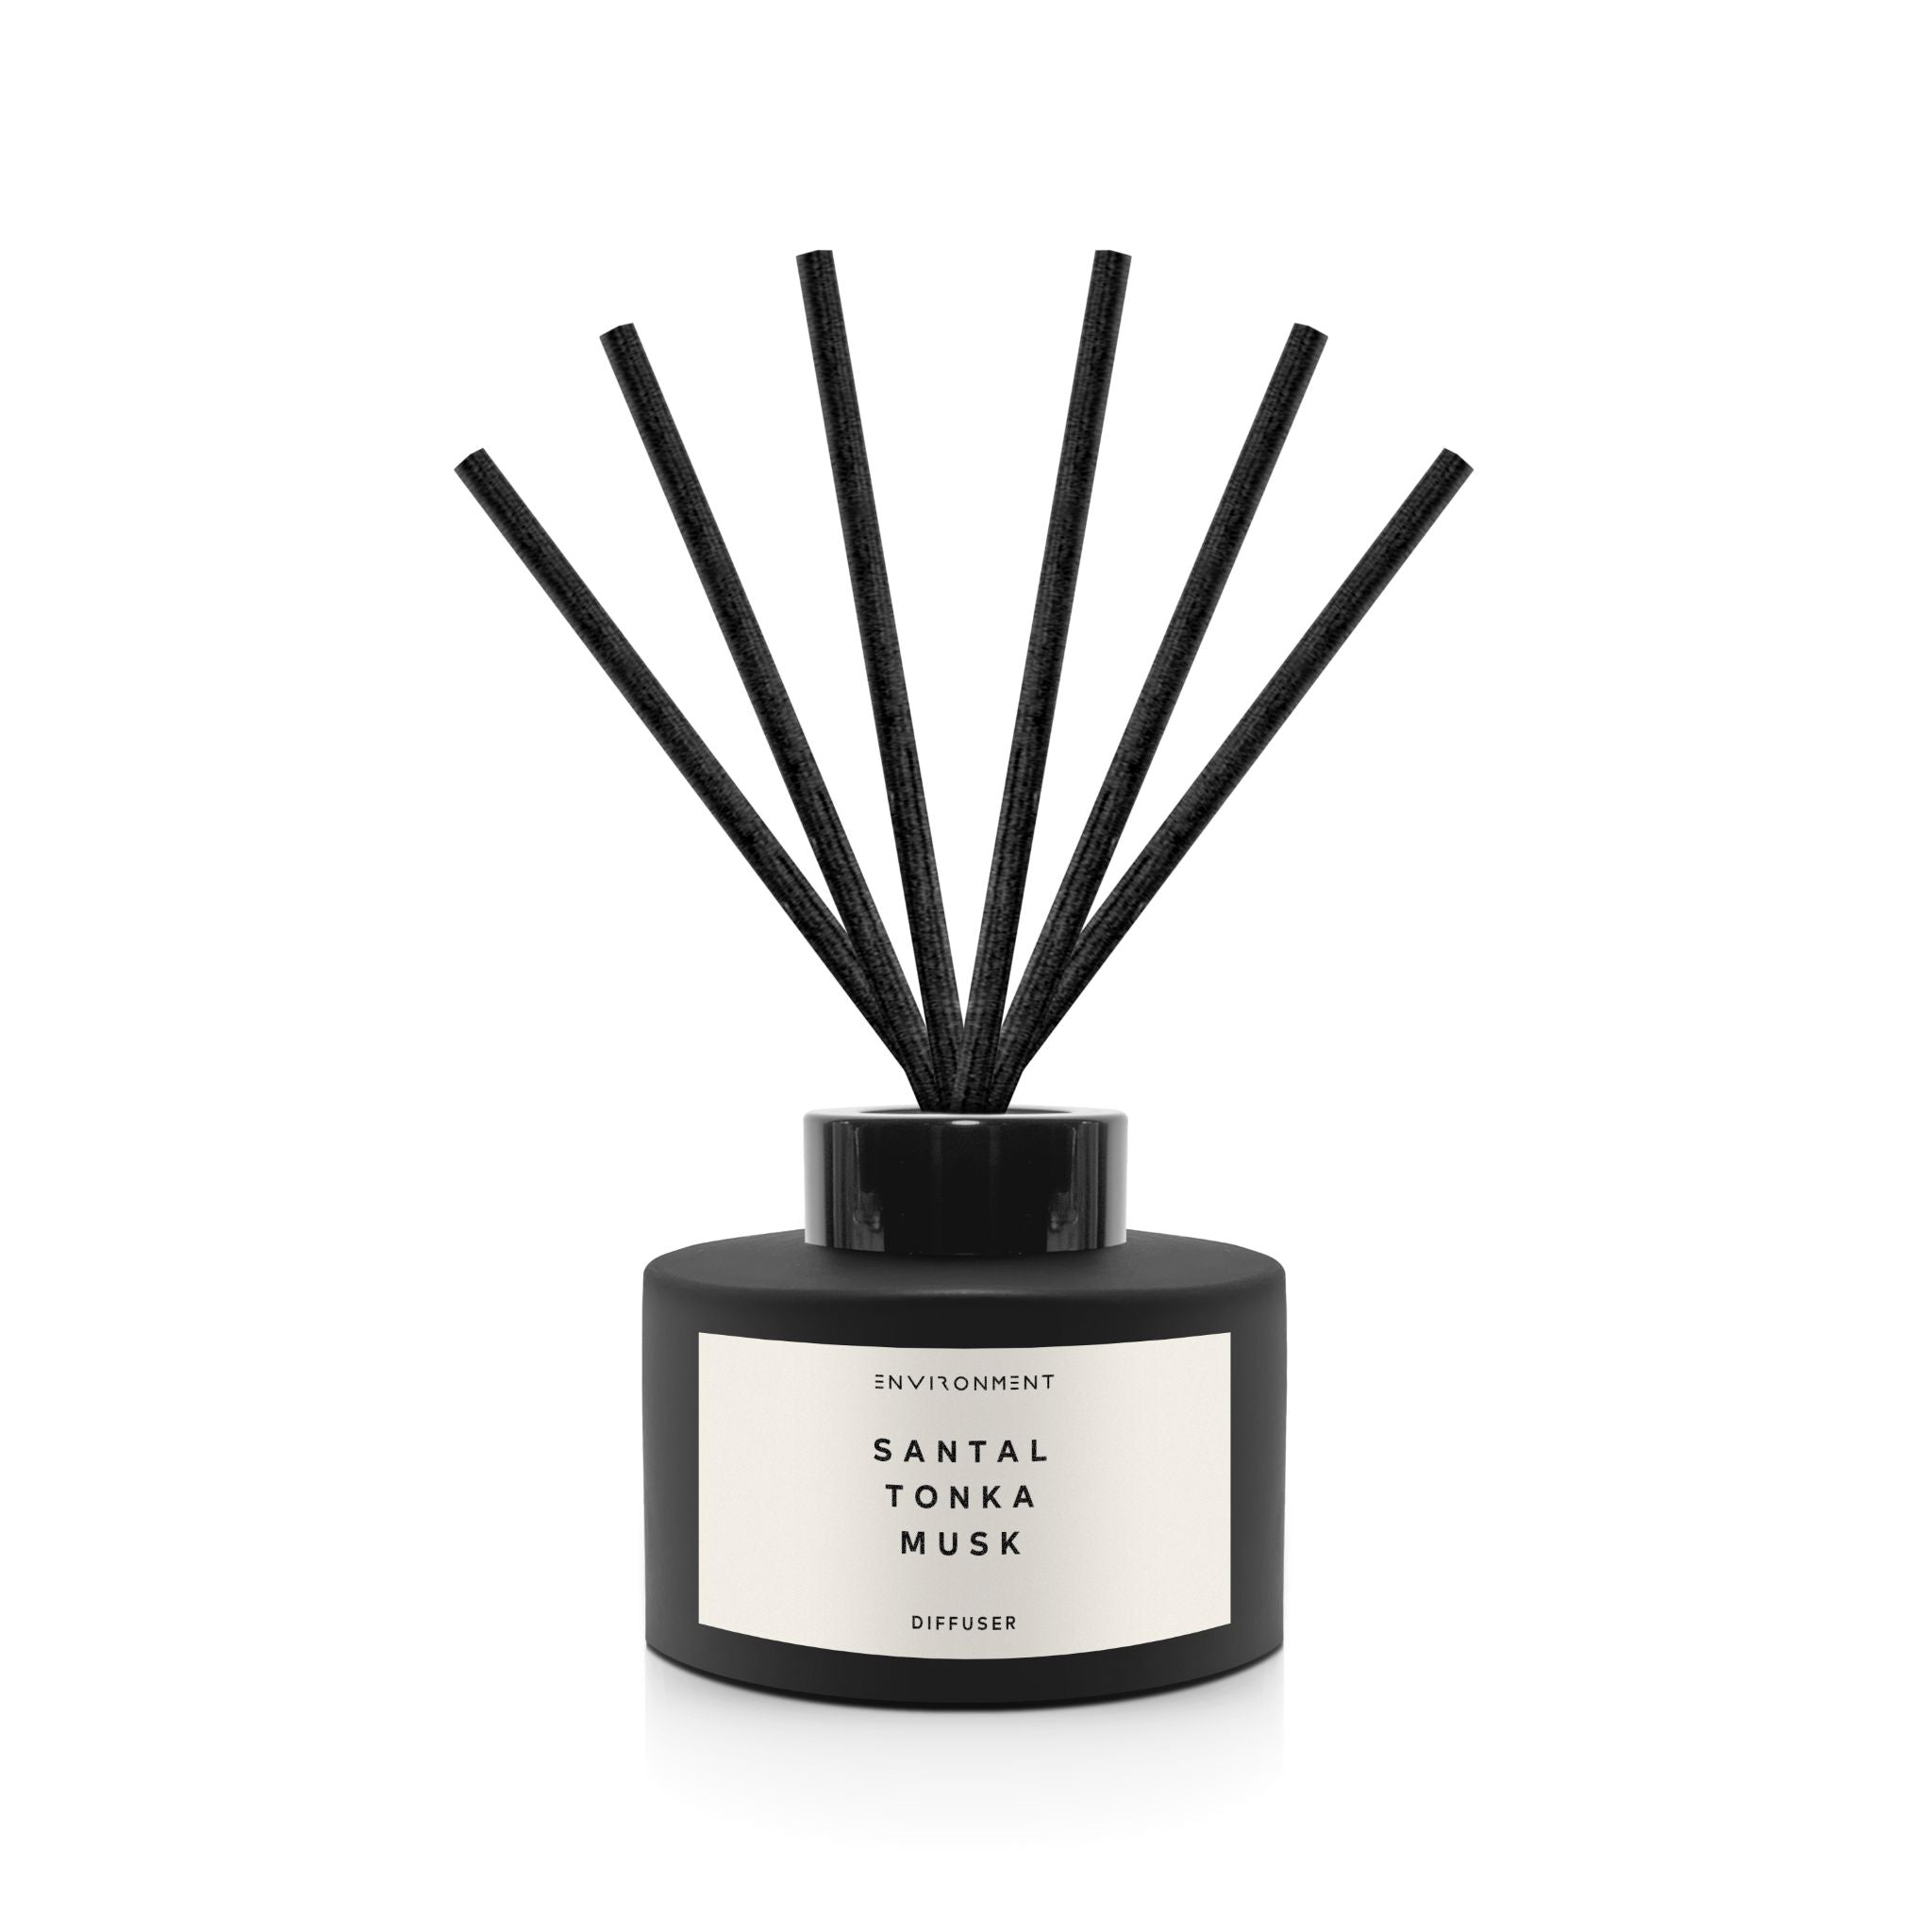 Santal | Tonka | Musk 200ml Diffuser and 8oz Candle Gift Pack (Inspired by Le Labo Santal® and 1 Hotel®)